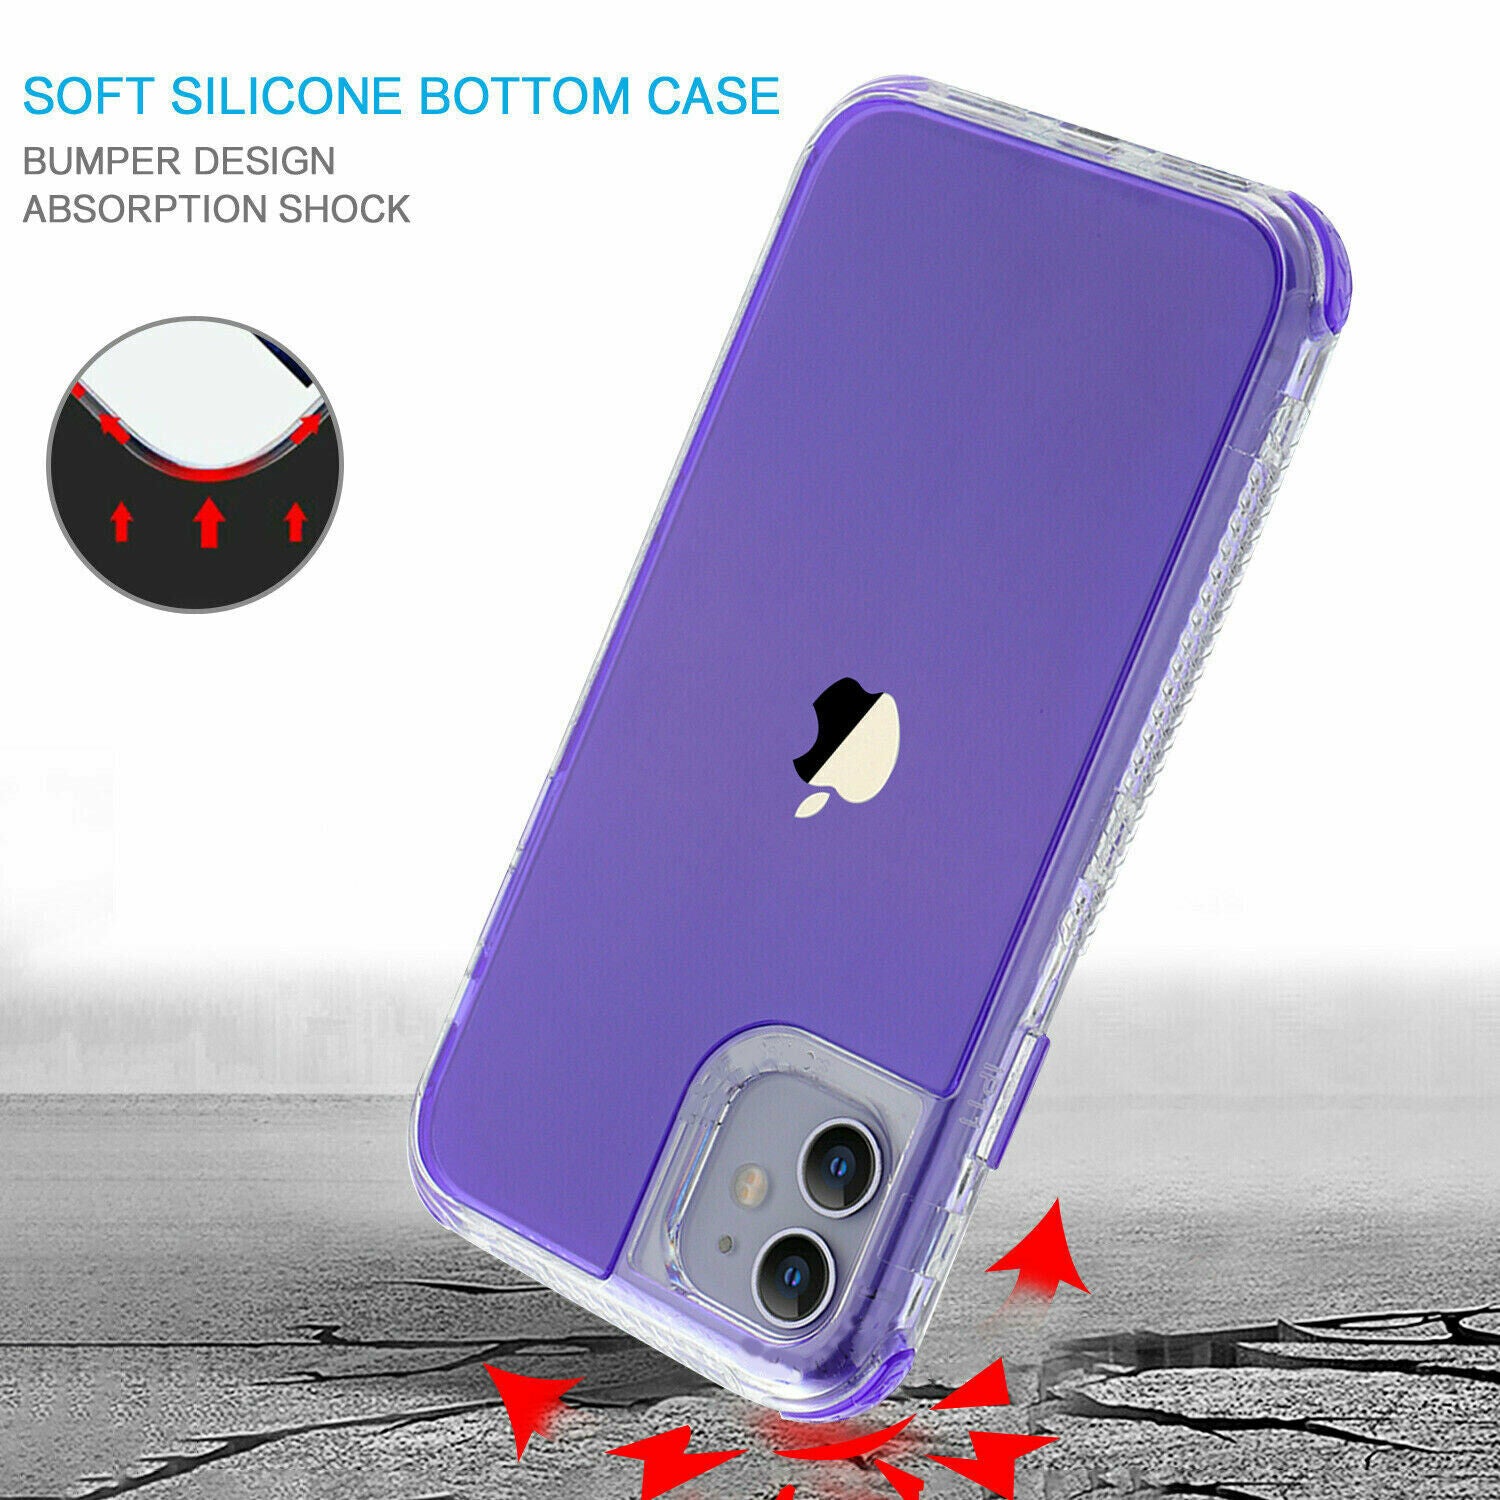 Shockproof Hybrid Bumper Cover for iPhone 12 Pro Max/11 Pro Max - carolay.co